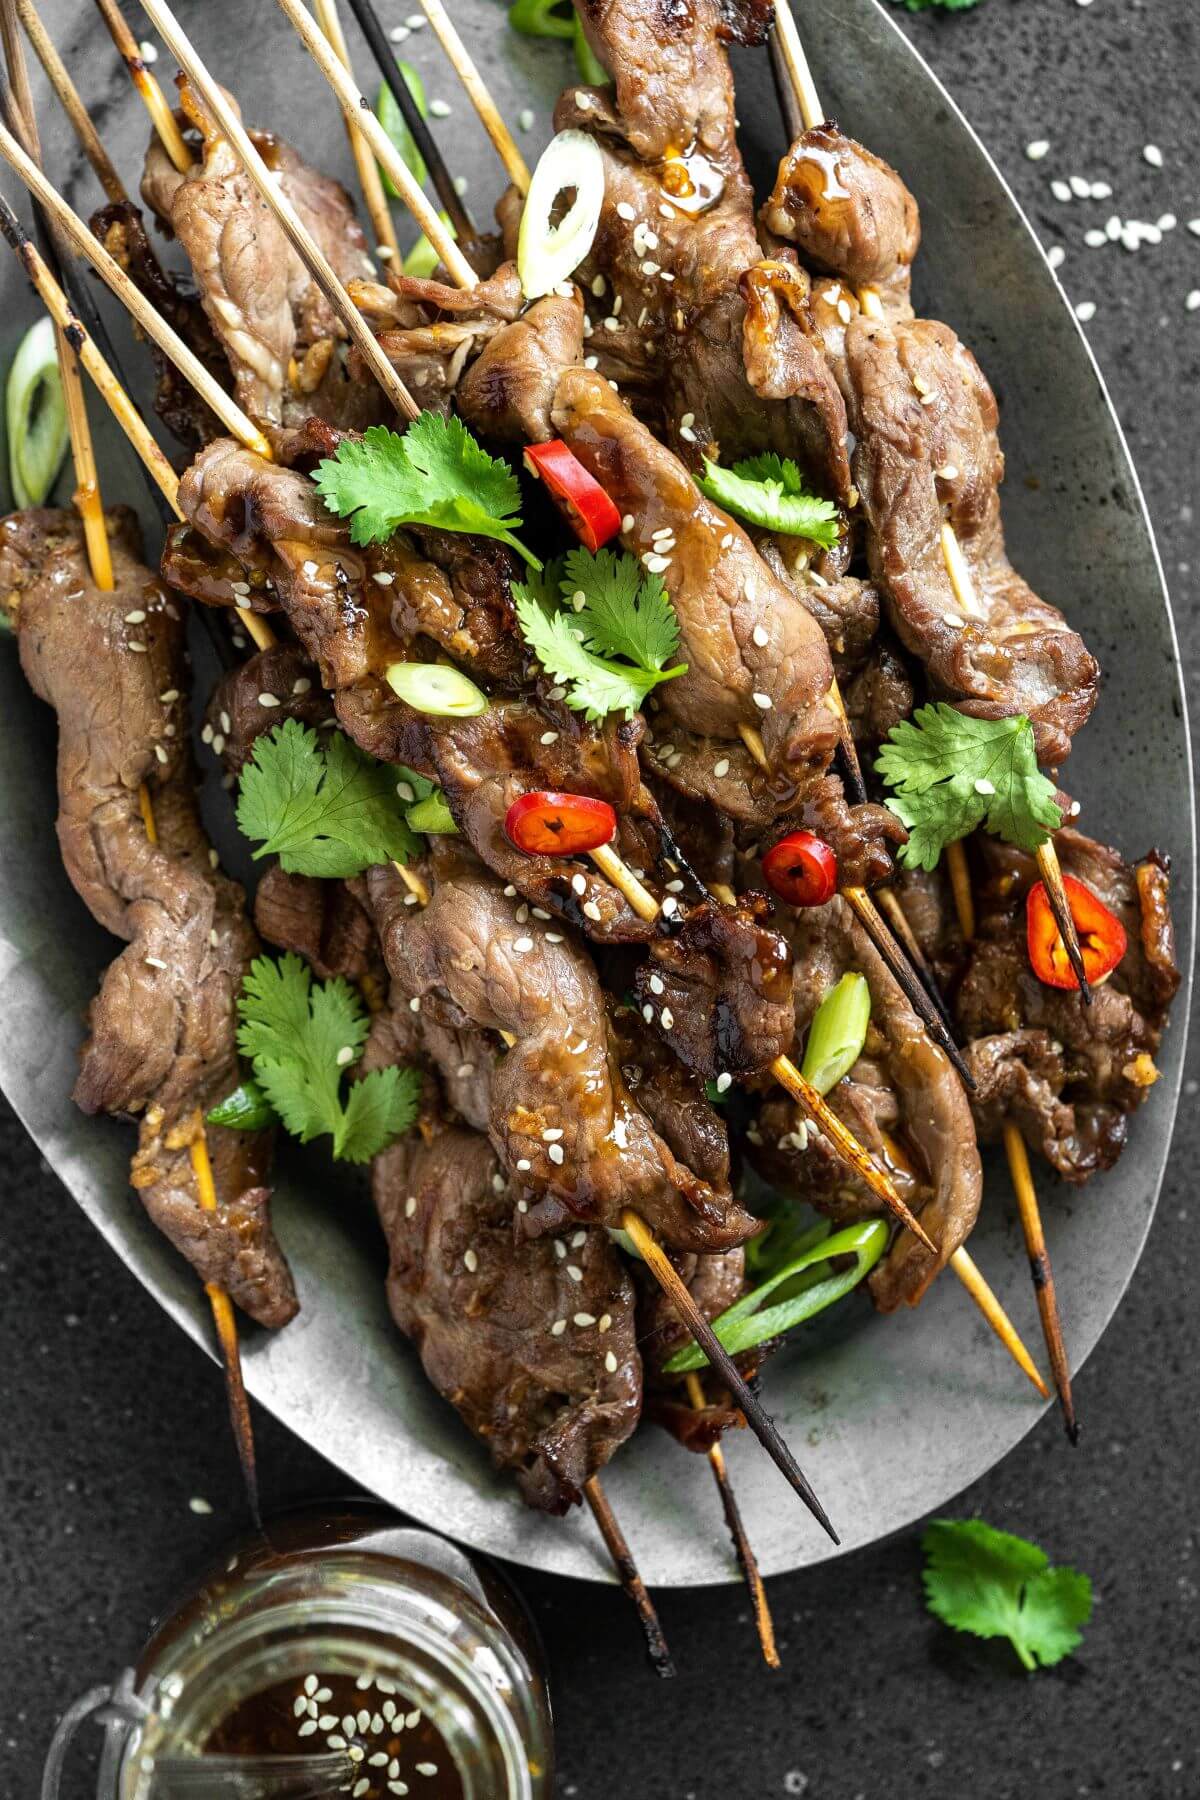 A platter of grilled Teriyaki Beef Sticks garnished with chopped green herbs and red hot peppers.